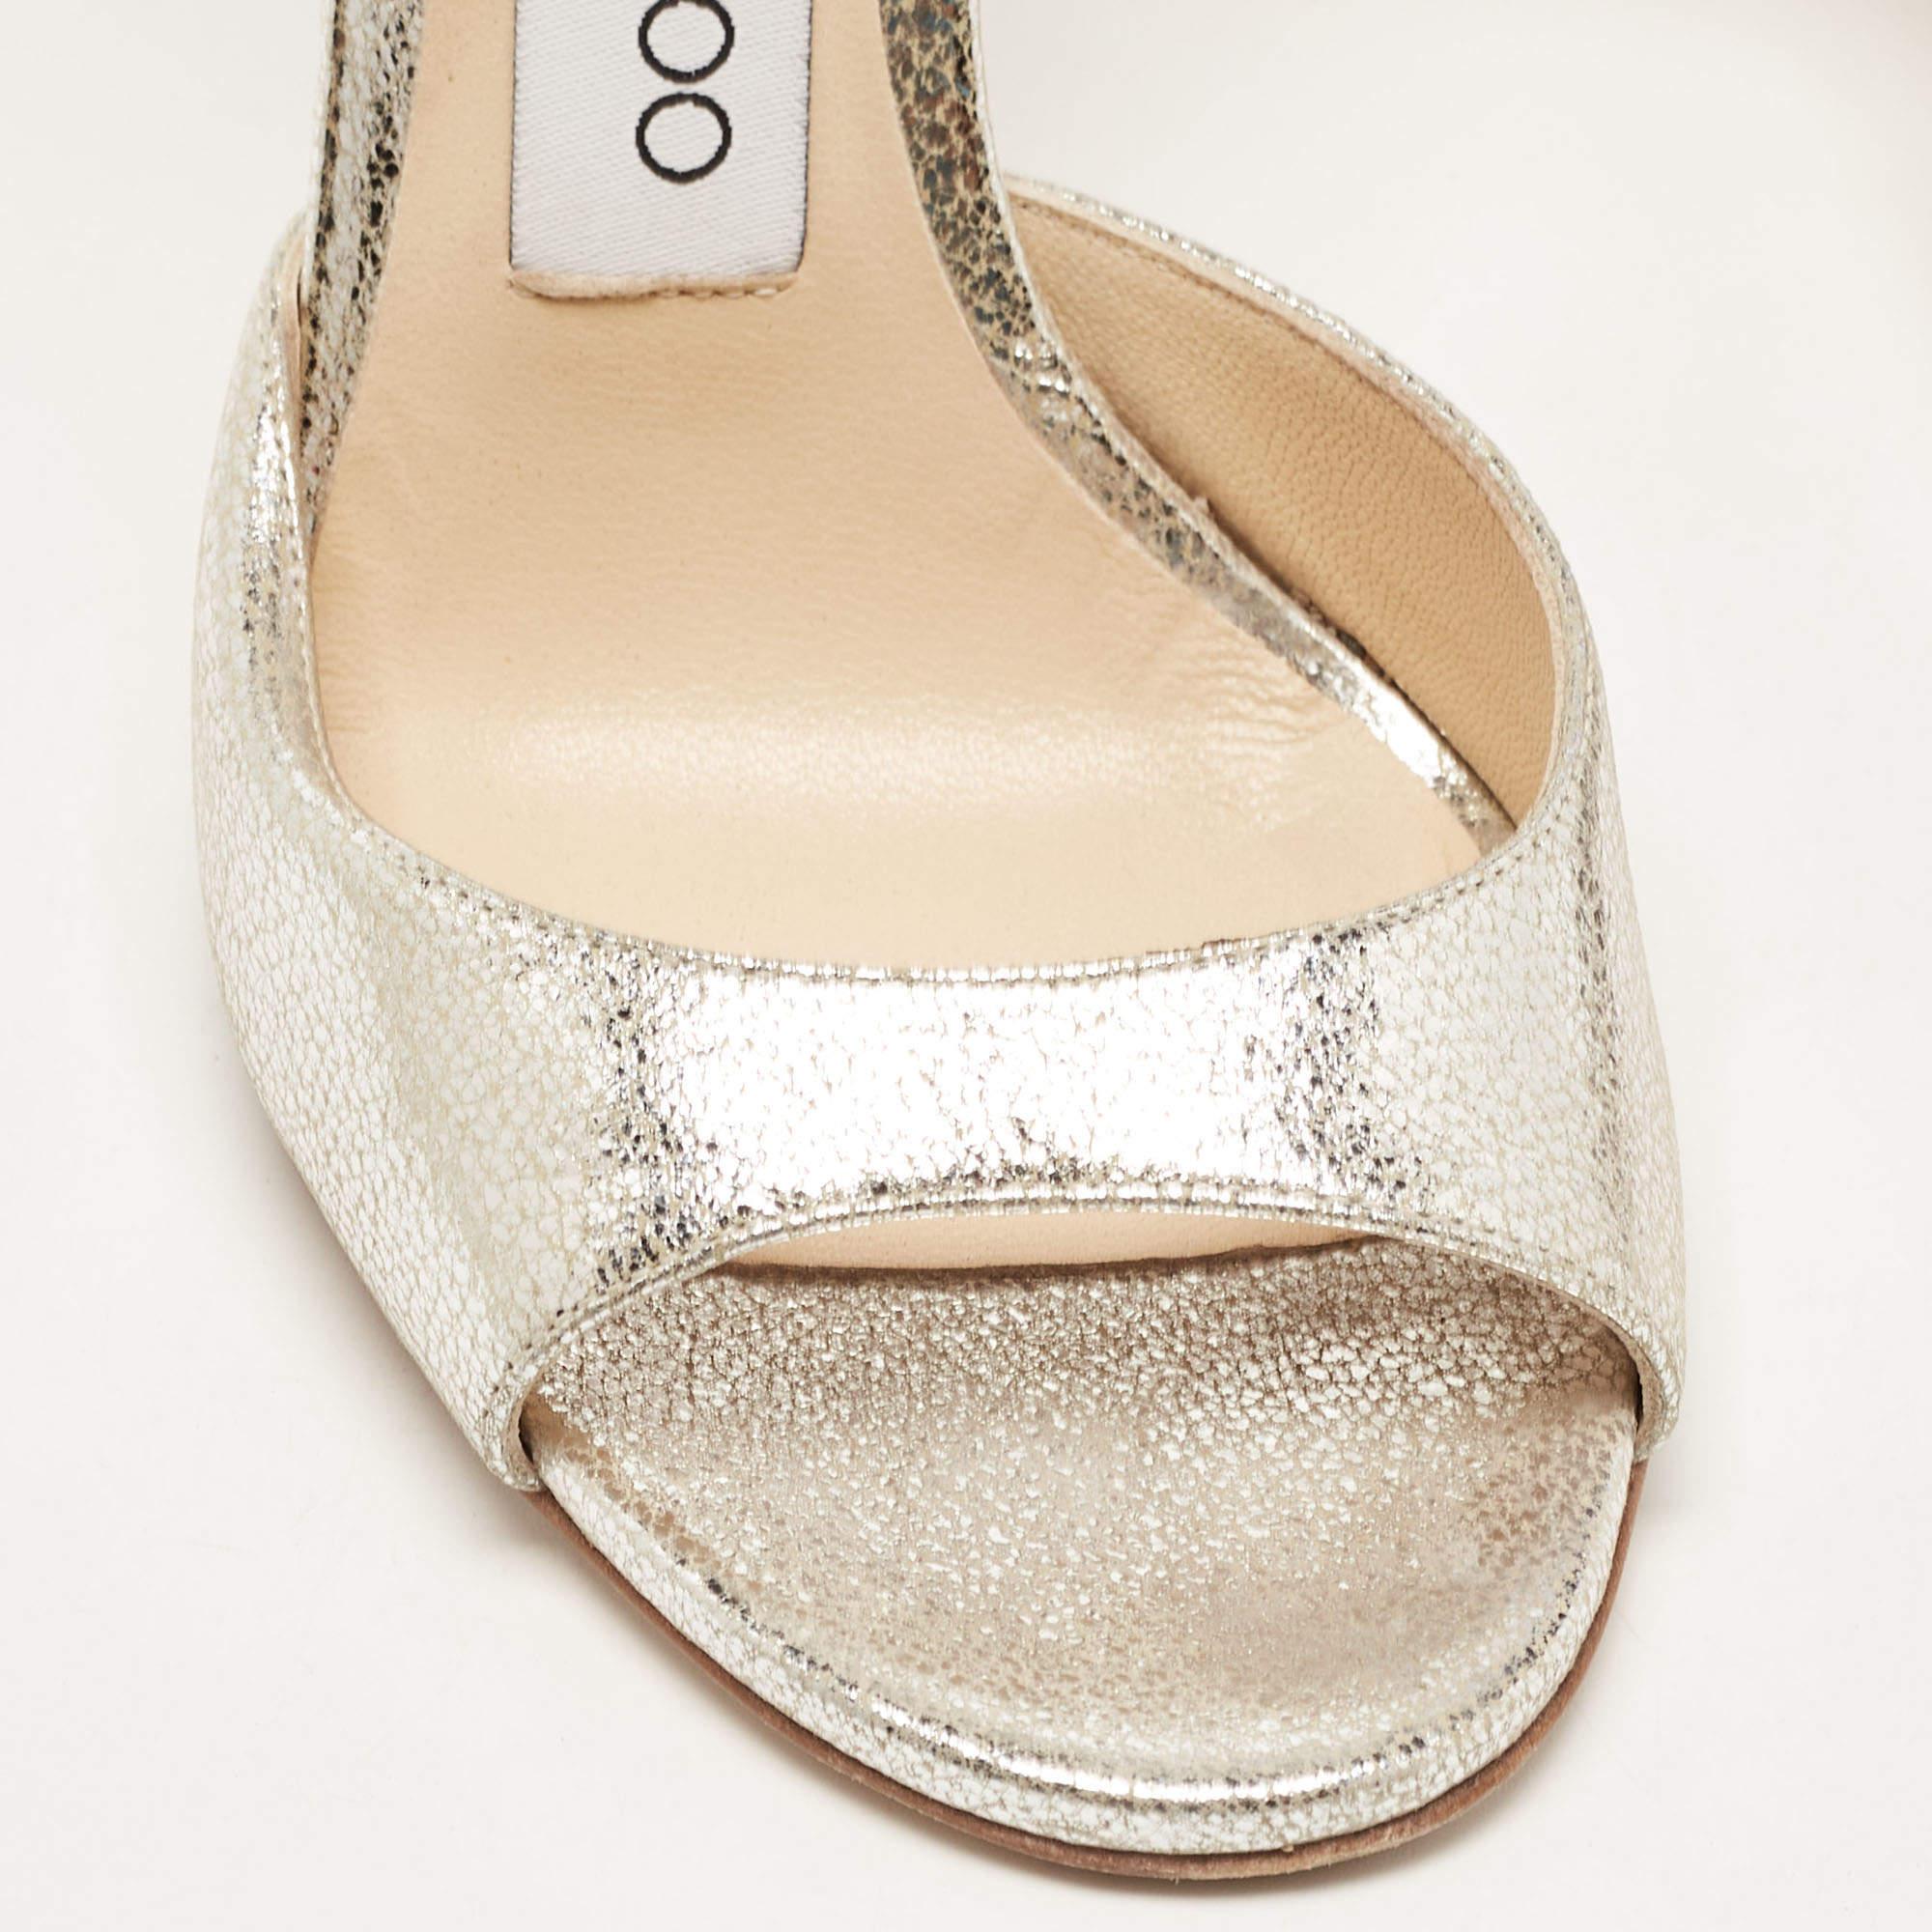 Jimmy Choo Silver Crackled Patent Leather Lane Sandals Size 35 For Sale 3